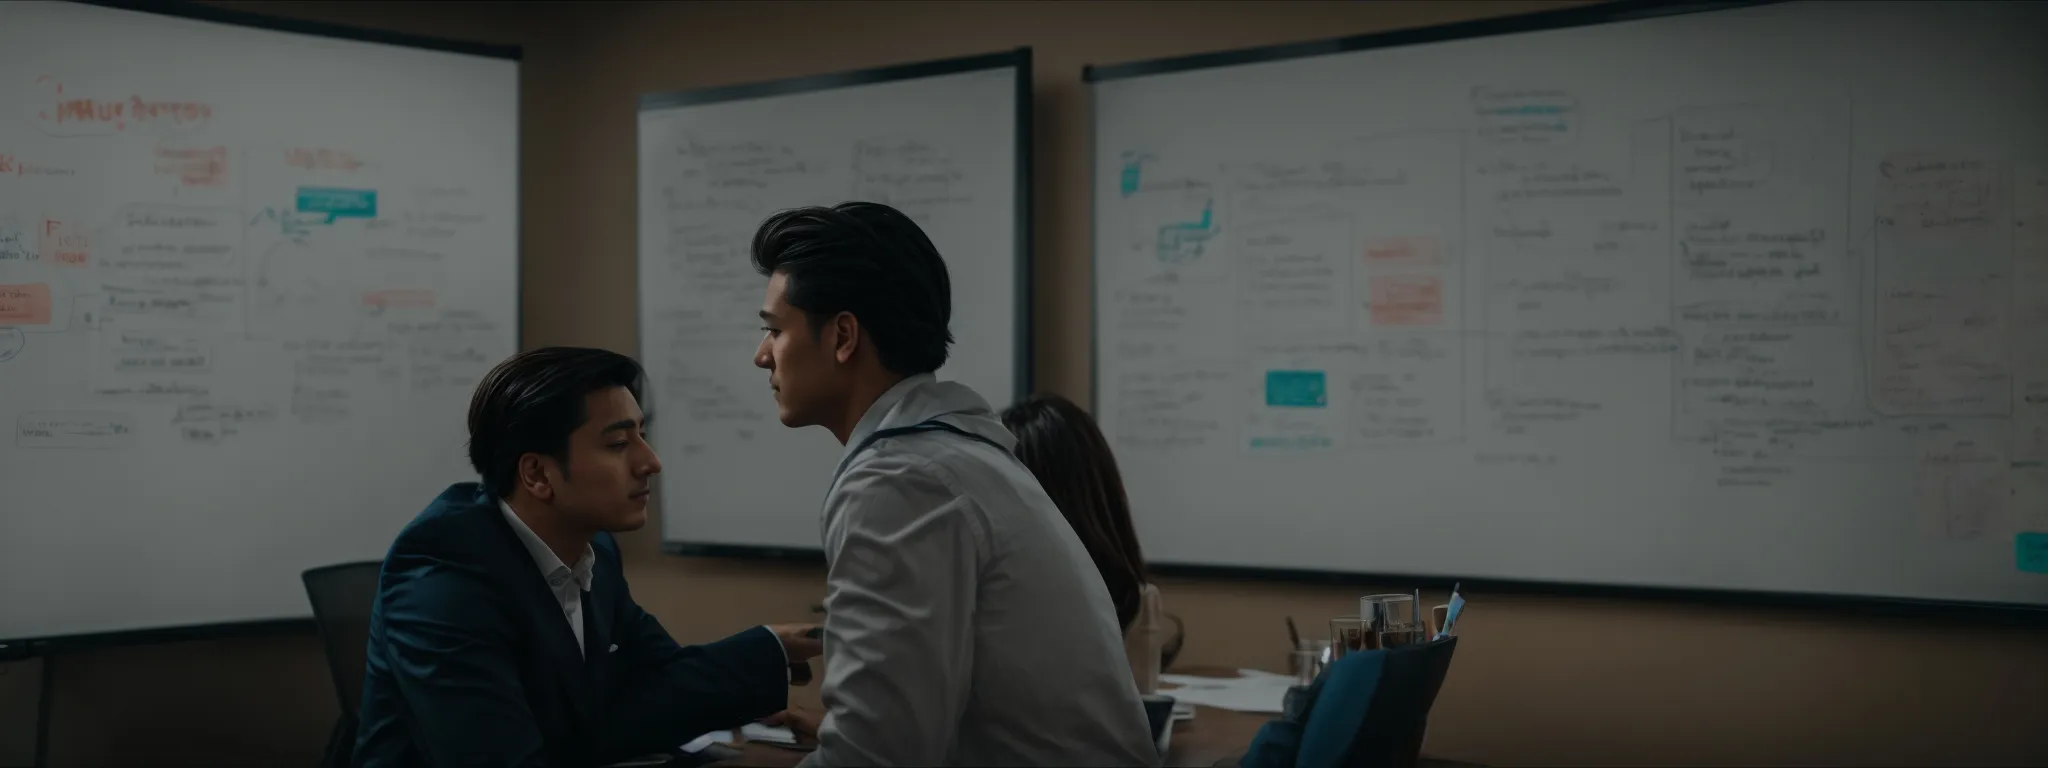 two professionals, one from it and the other from marketing, are engaged in a strategy meeting with a whiteboard filled with seo concepts in the background.